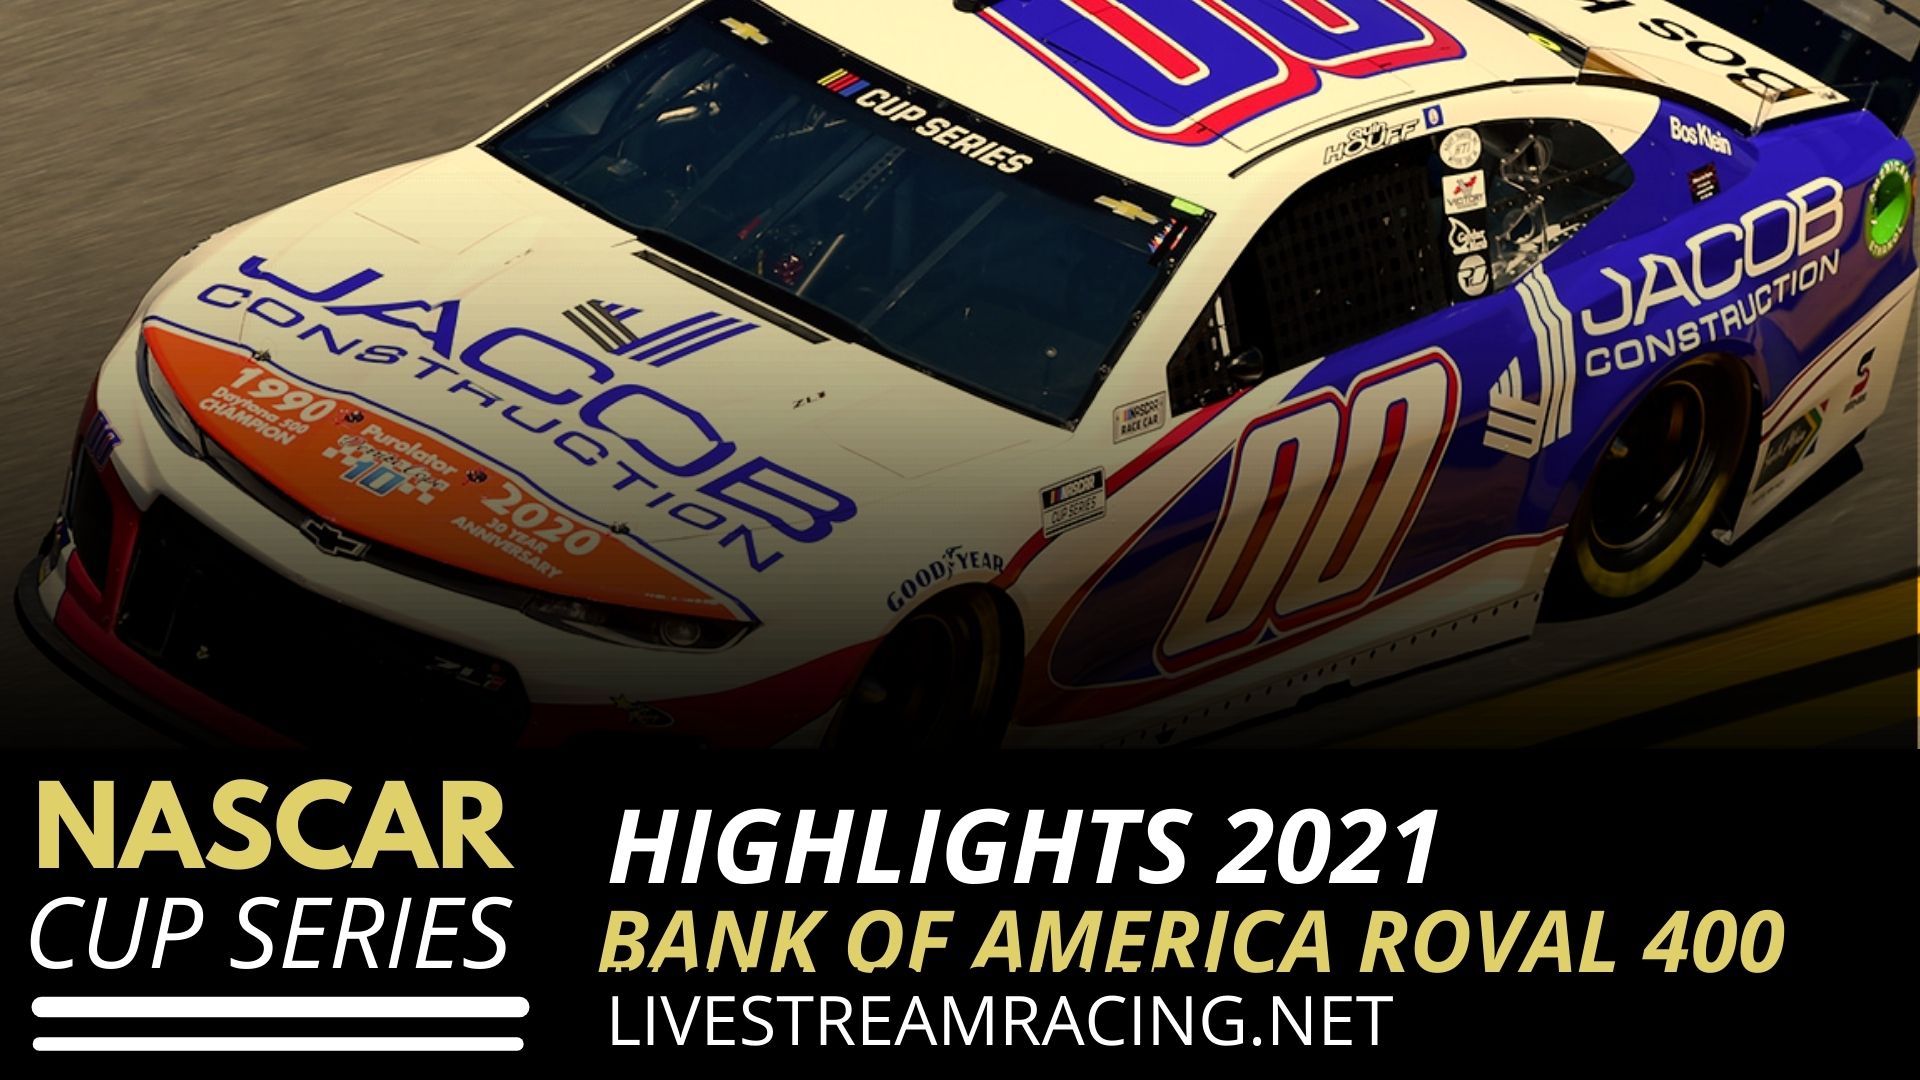 Nascar Bank Of America ROVAL 400 Highlights 2021 Cup Series